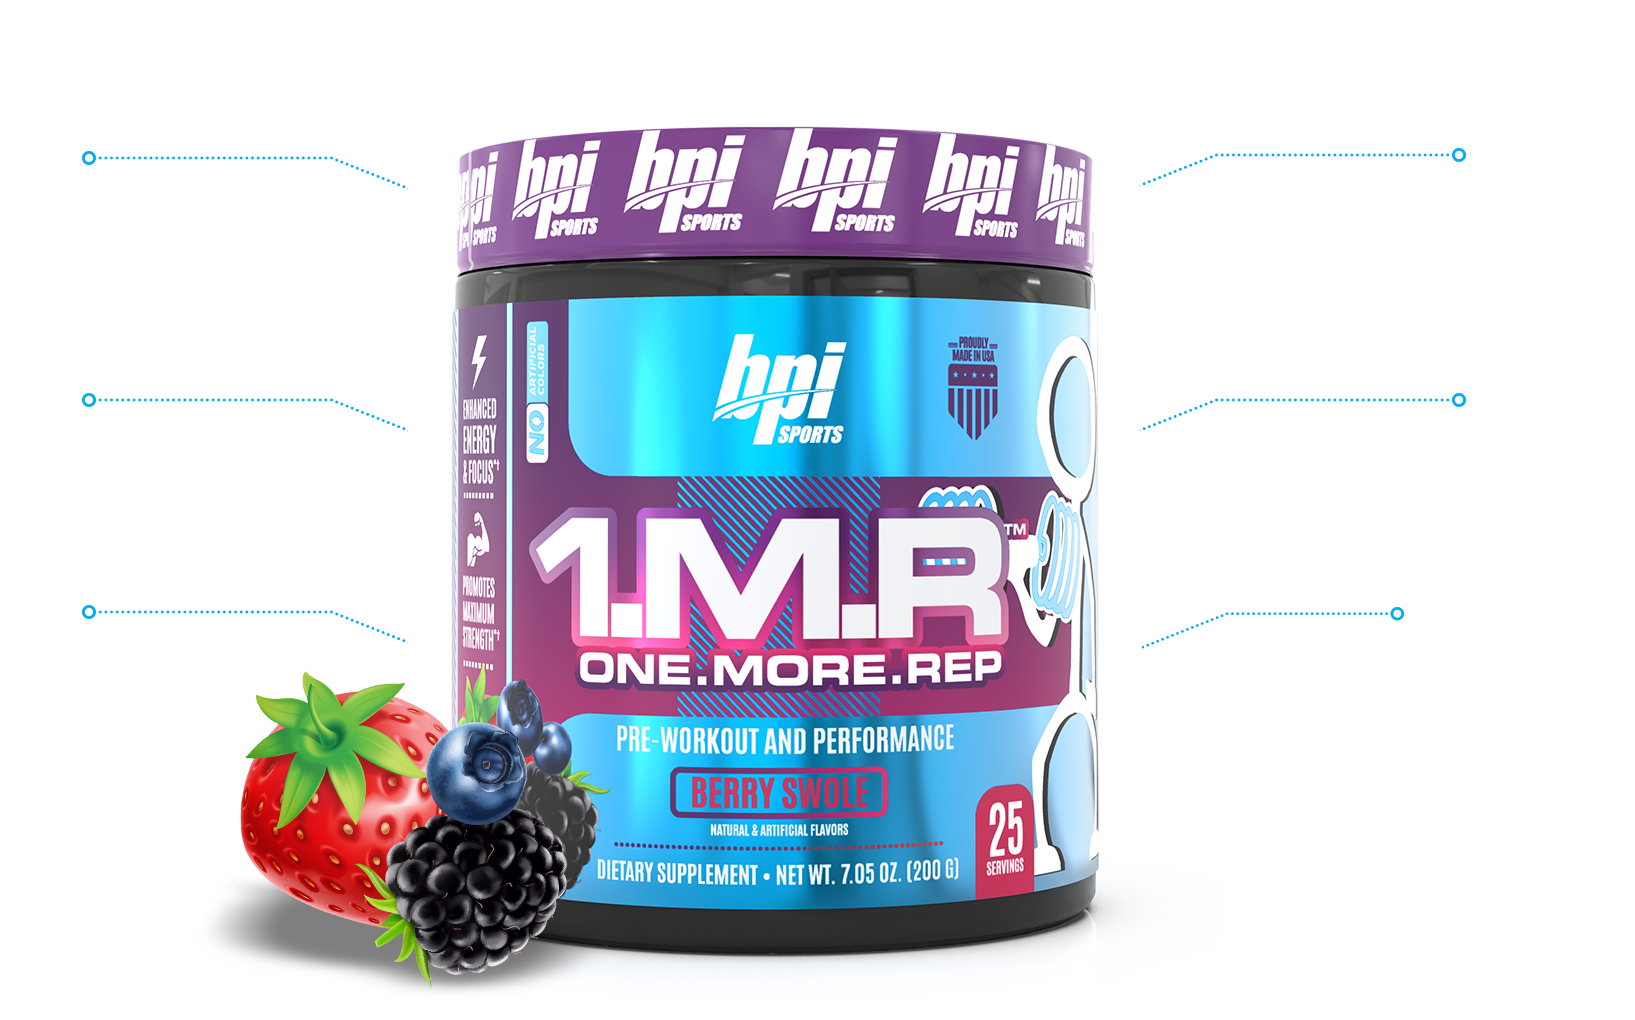 Bottle of 1.M.R.™ Berry Swole with a strawberry, blackberry, and blueberry. List of ingredients next to it: Glycerol, Caffeine Anhydrous, Mucuna Pruriens, Theobromine, Teacrine, and Dynamine